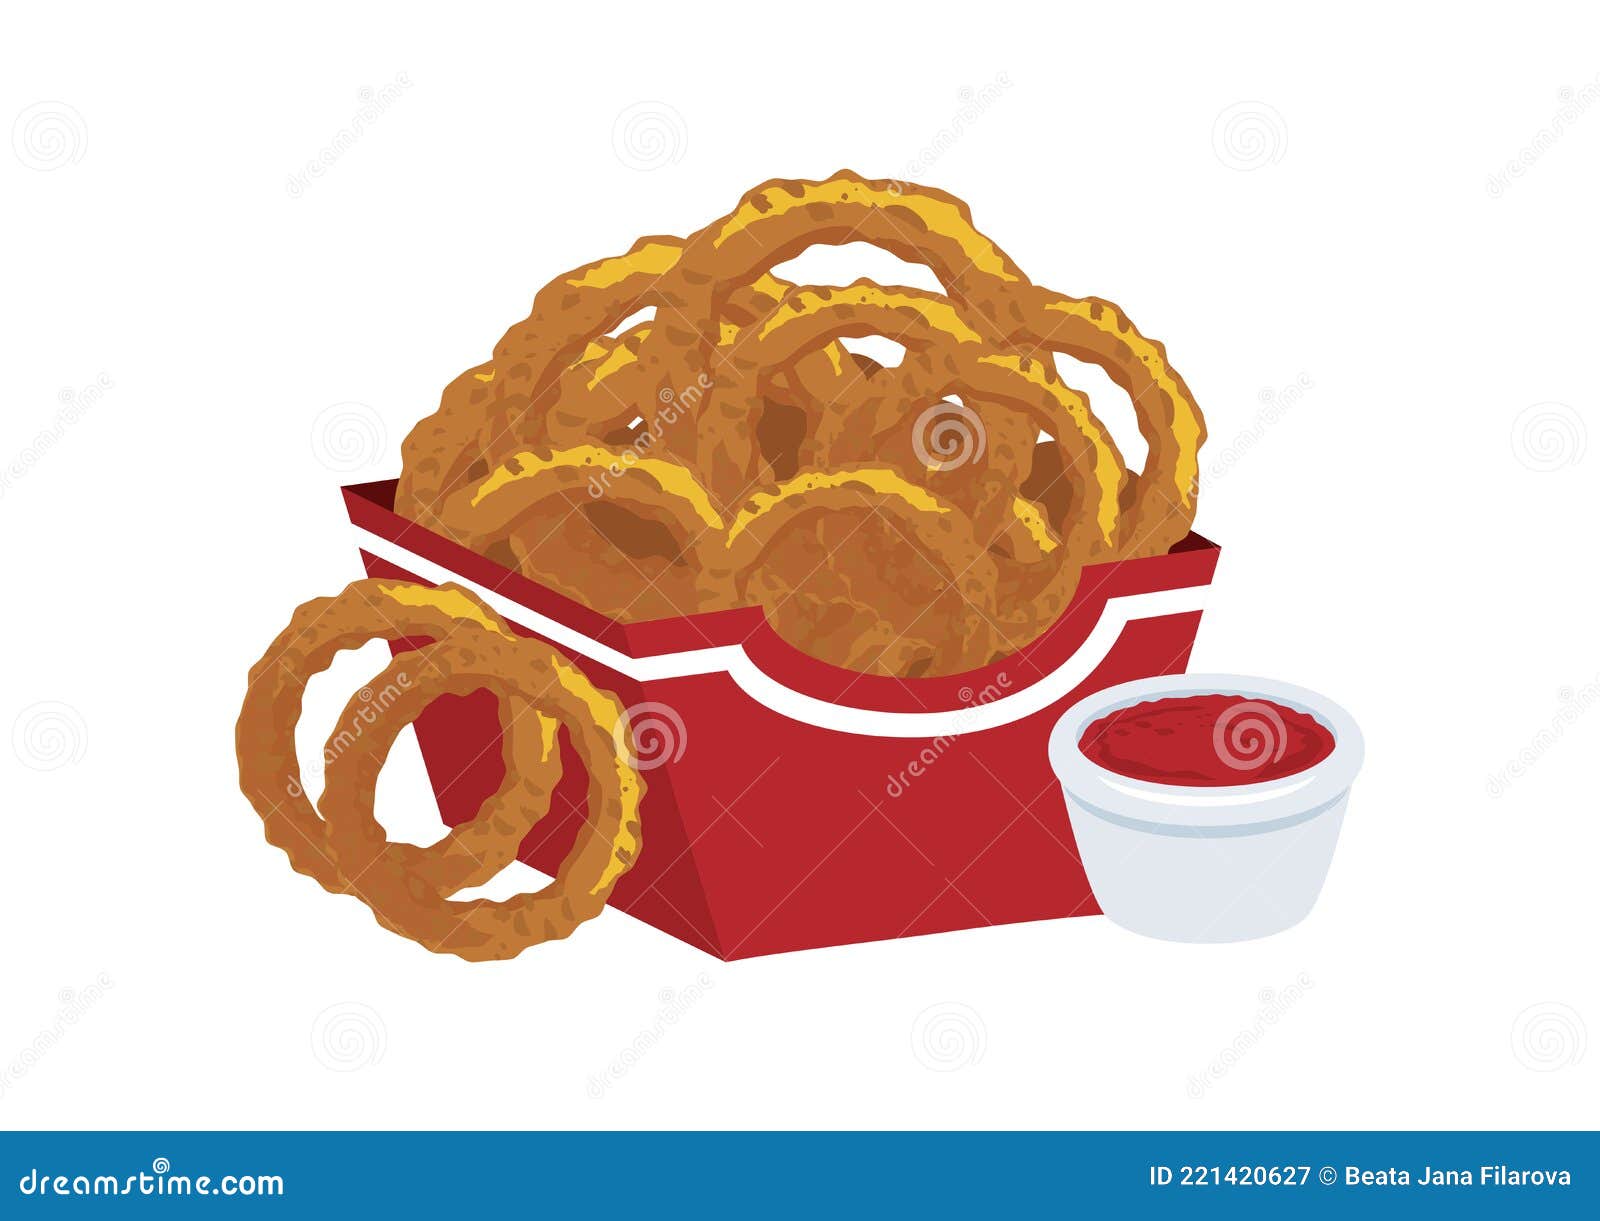 Person Onion Rings: Over 128 Royalty-Free Licensable Stock Illustrations &  Drawings | Shutterstock